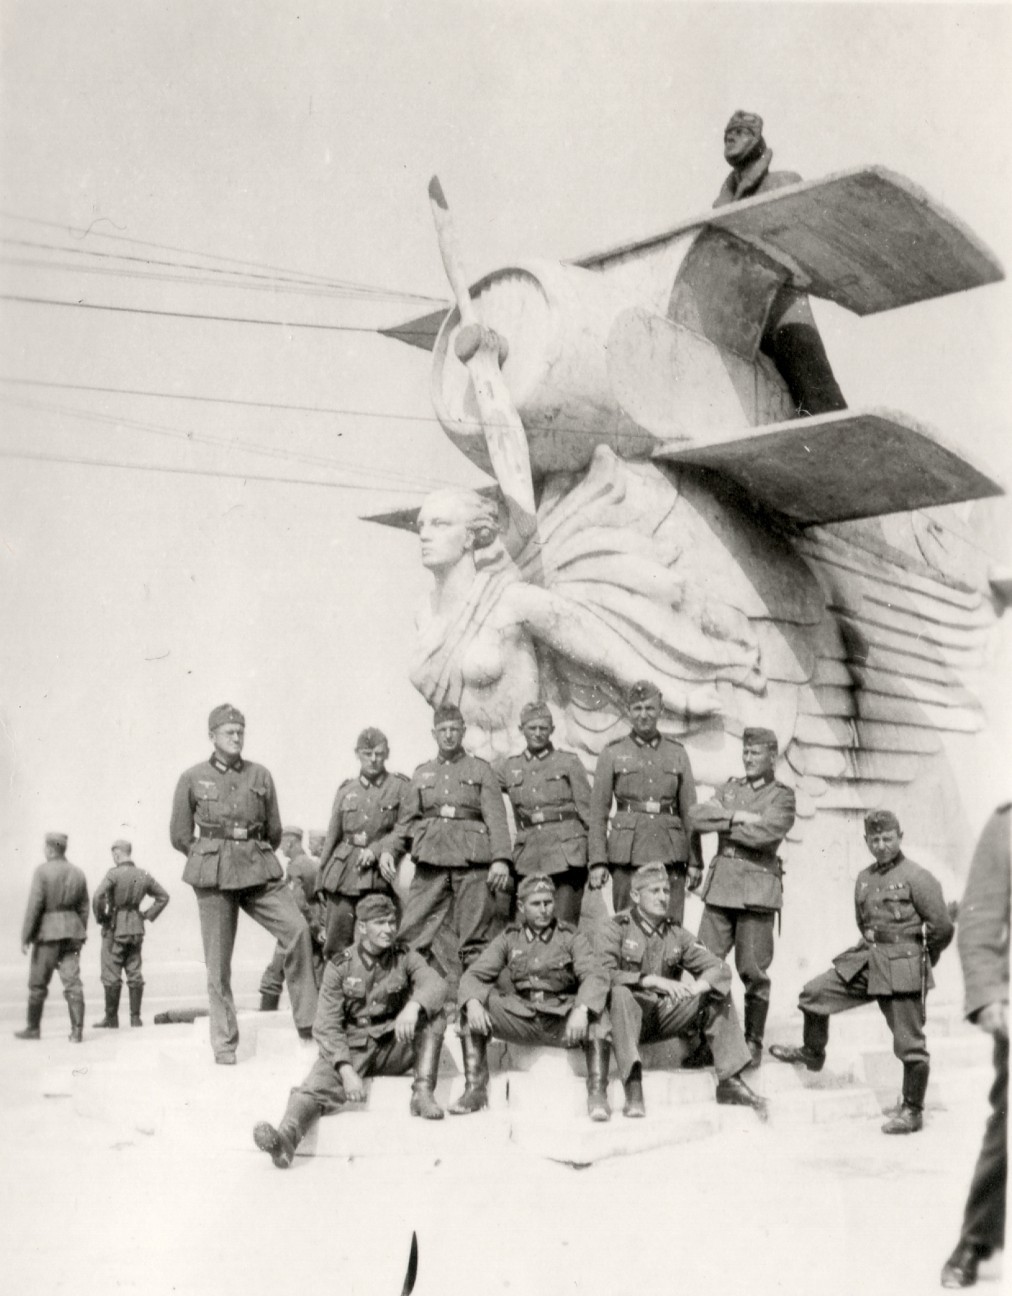 An interesting photo of German Soldiers next to a Monument of Georges Guynemer in Dunkirk (I think is the location), 1941.